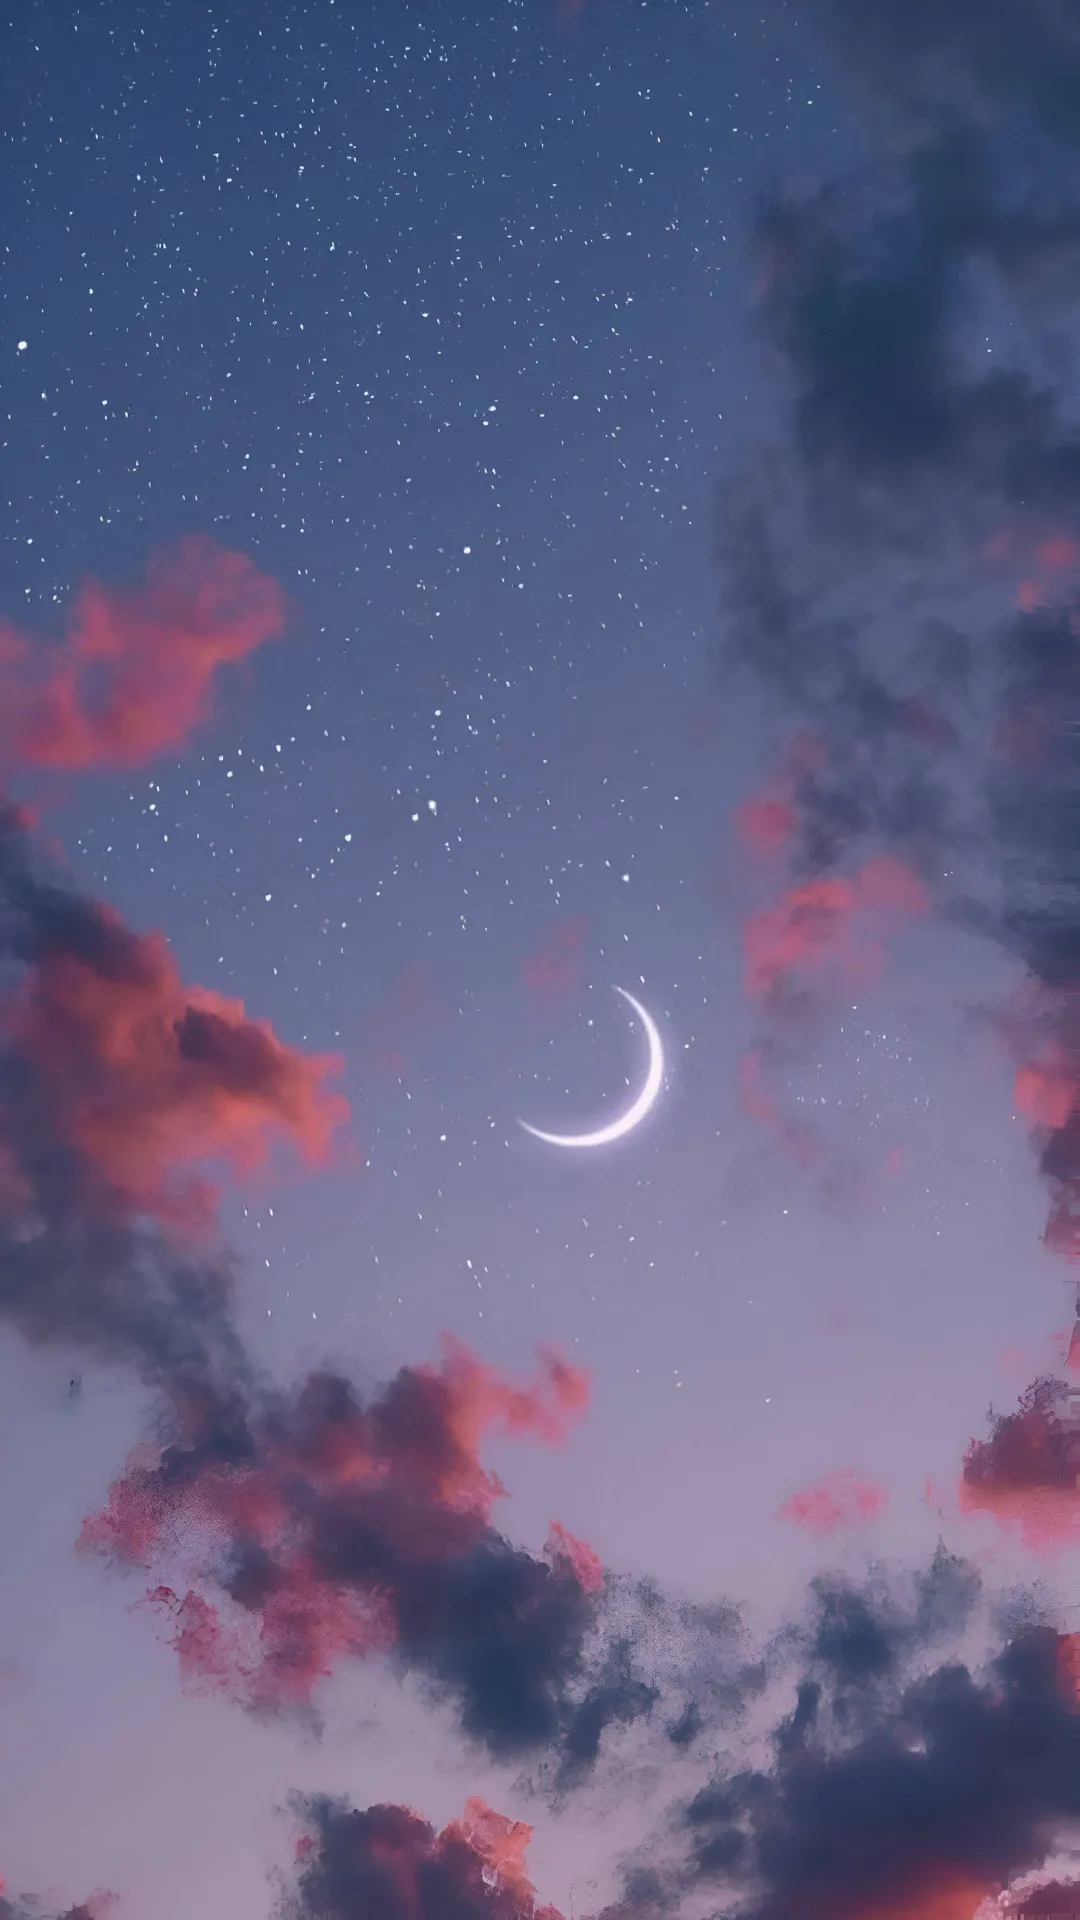 thumb for Moon Clouds Wallpaper